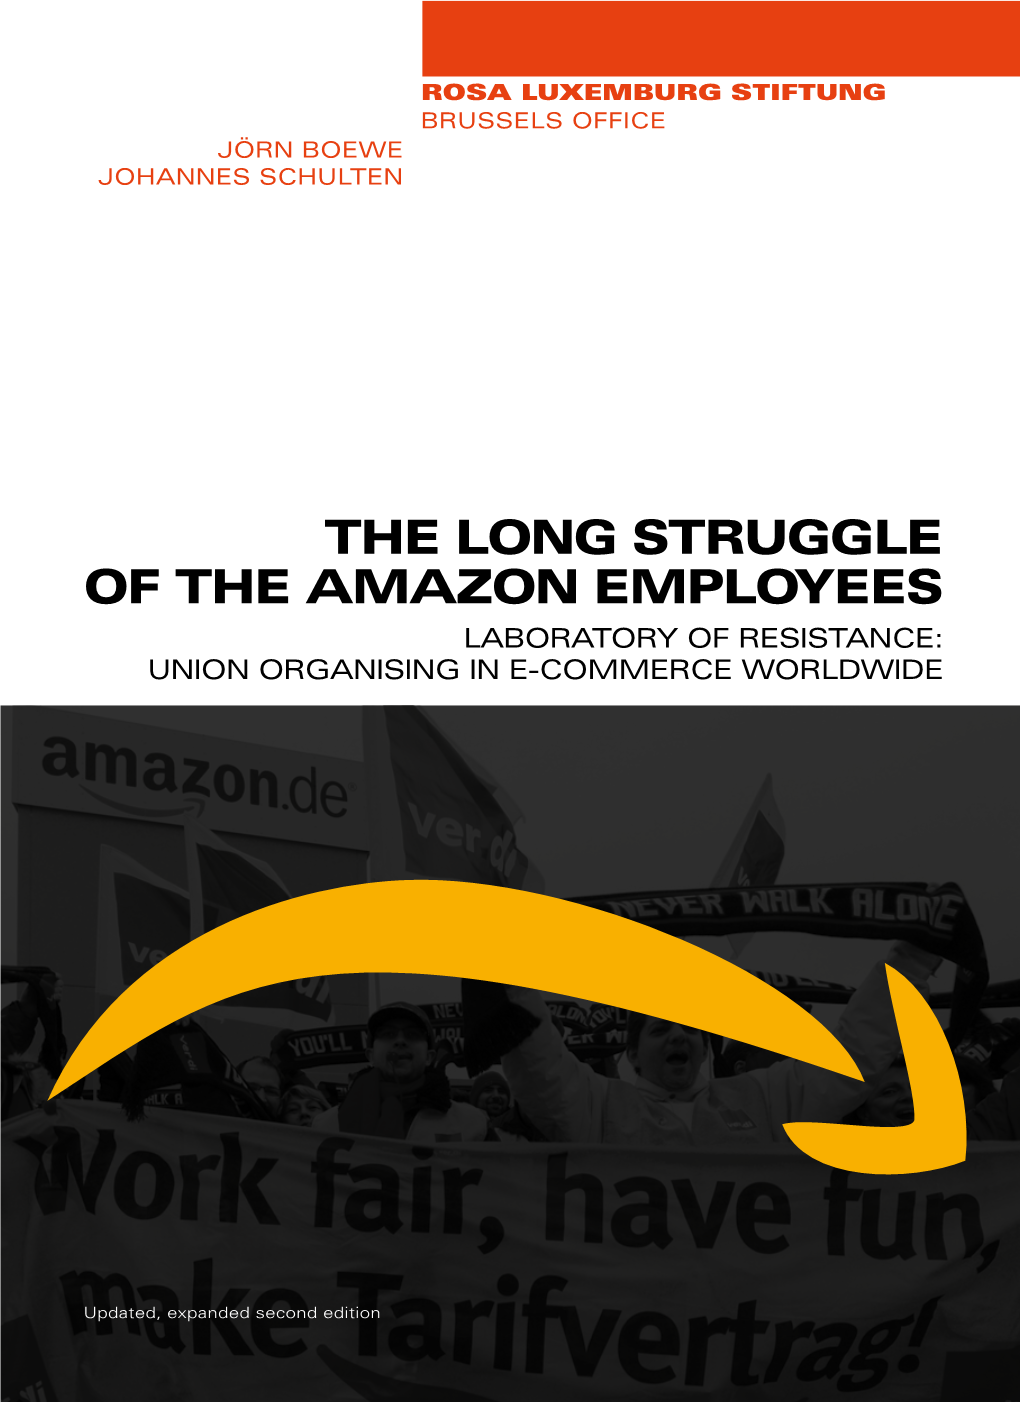 The Long Struggle of the Amazon Employees Laboratory of Resistance: Union Organising in E-Commerce Worldwide